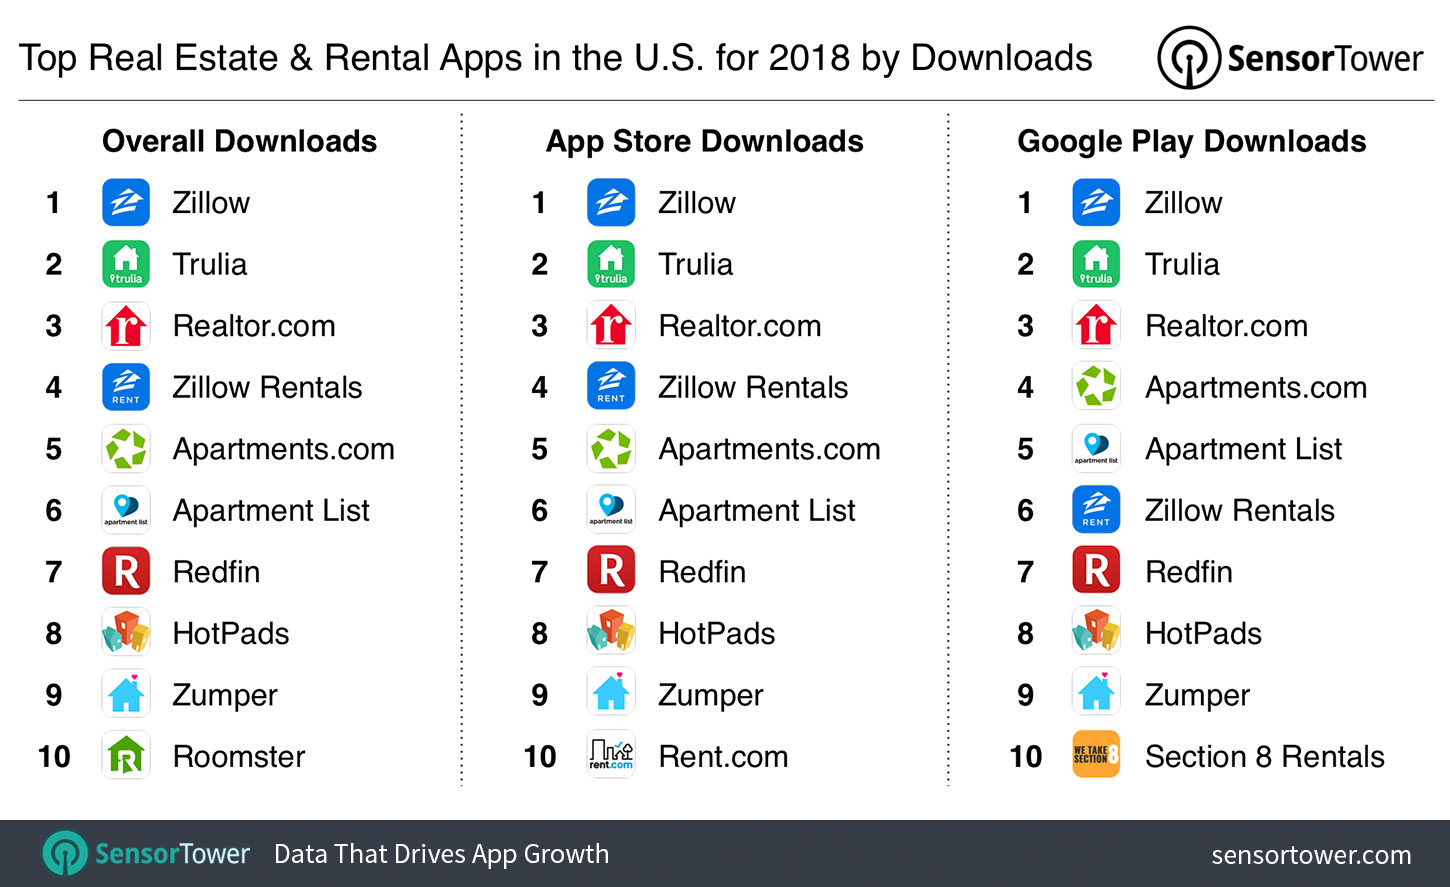 Top Real Estate and Rental Apps in the U.S. for 2018